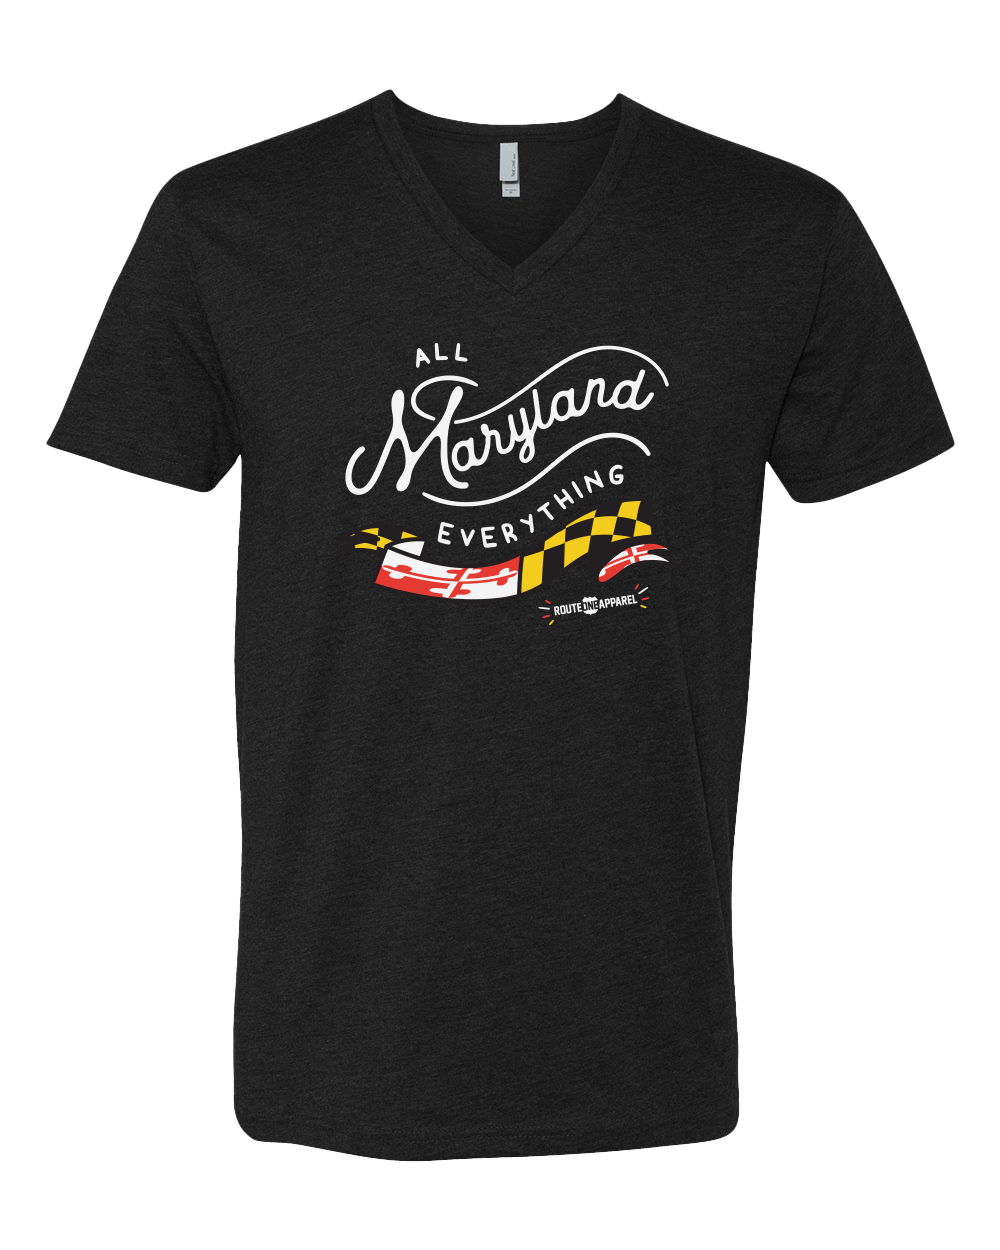 All Maryland Everything (Black) / V-neck Shirt - Route One Apparel